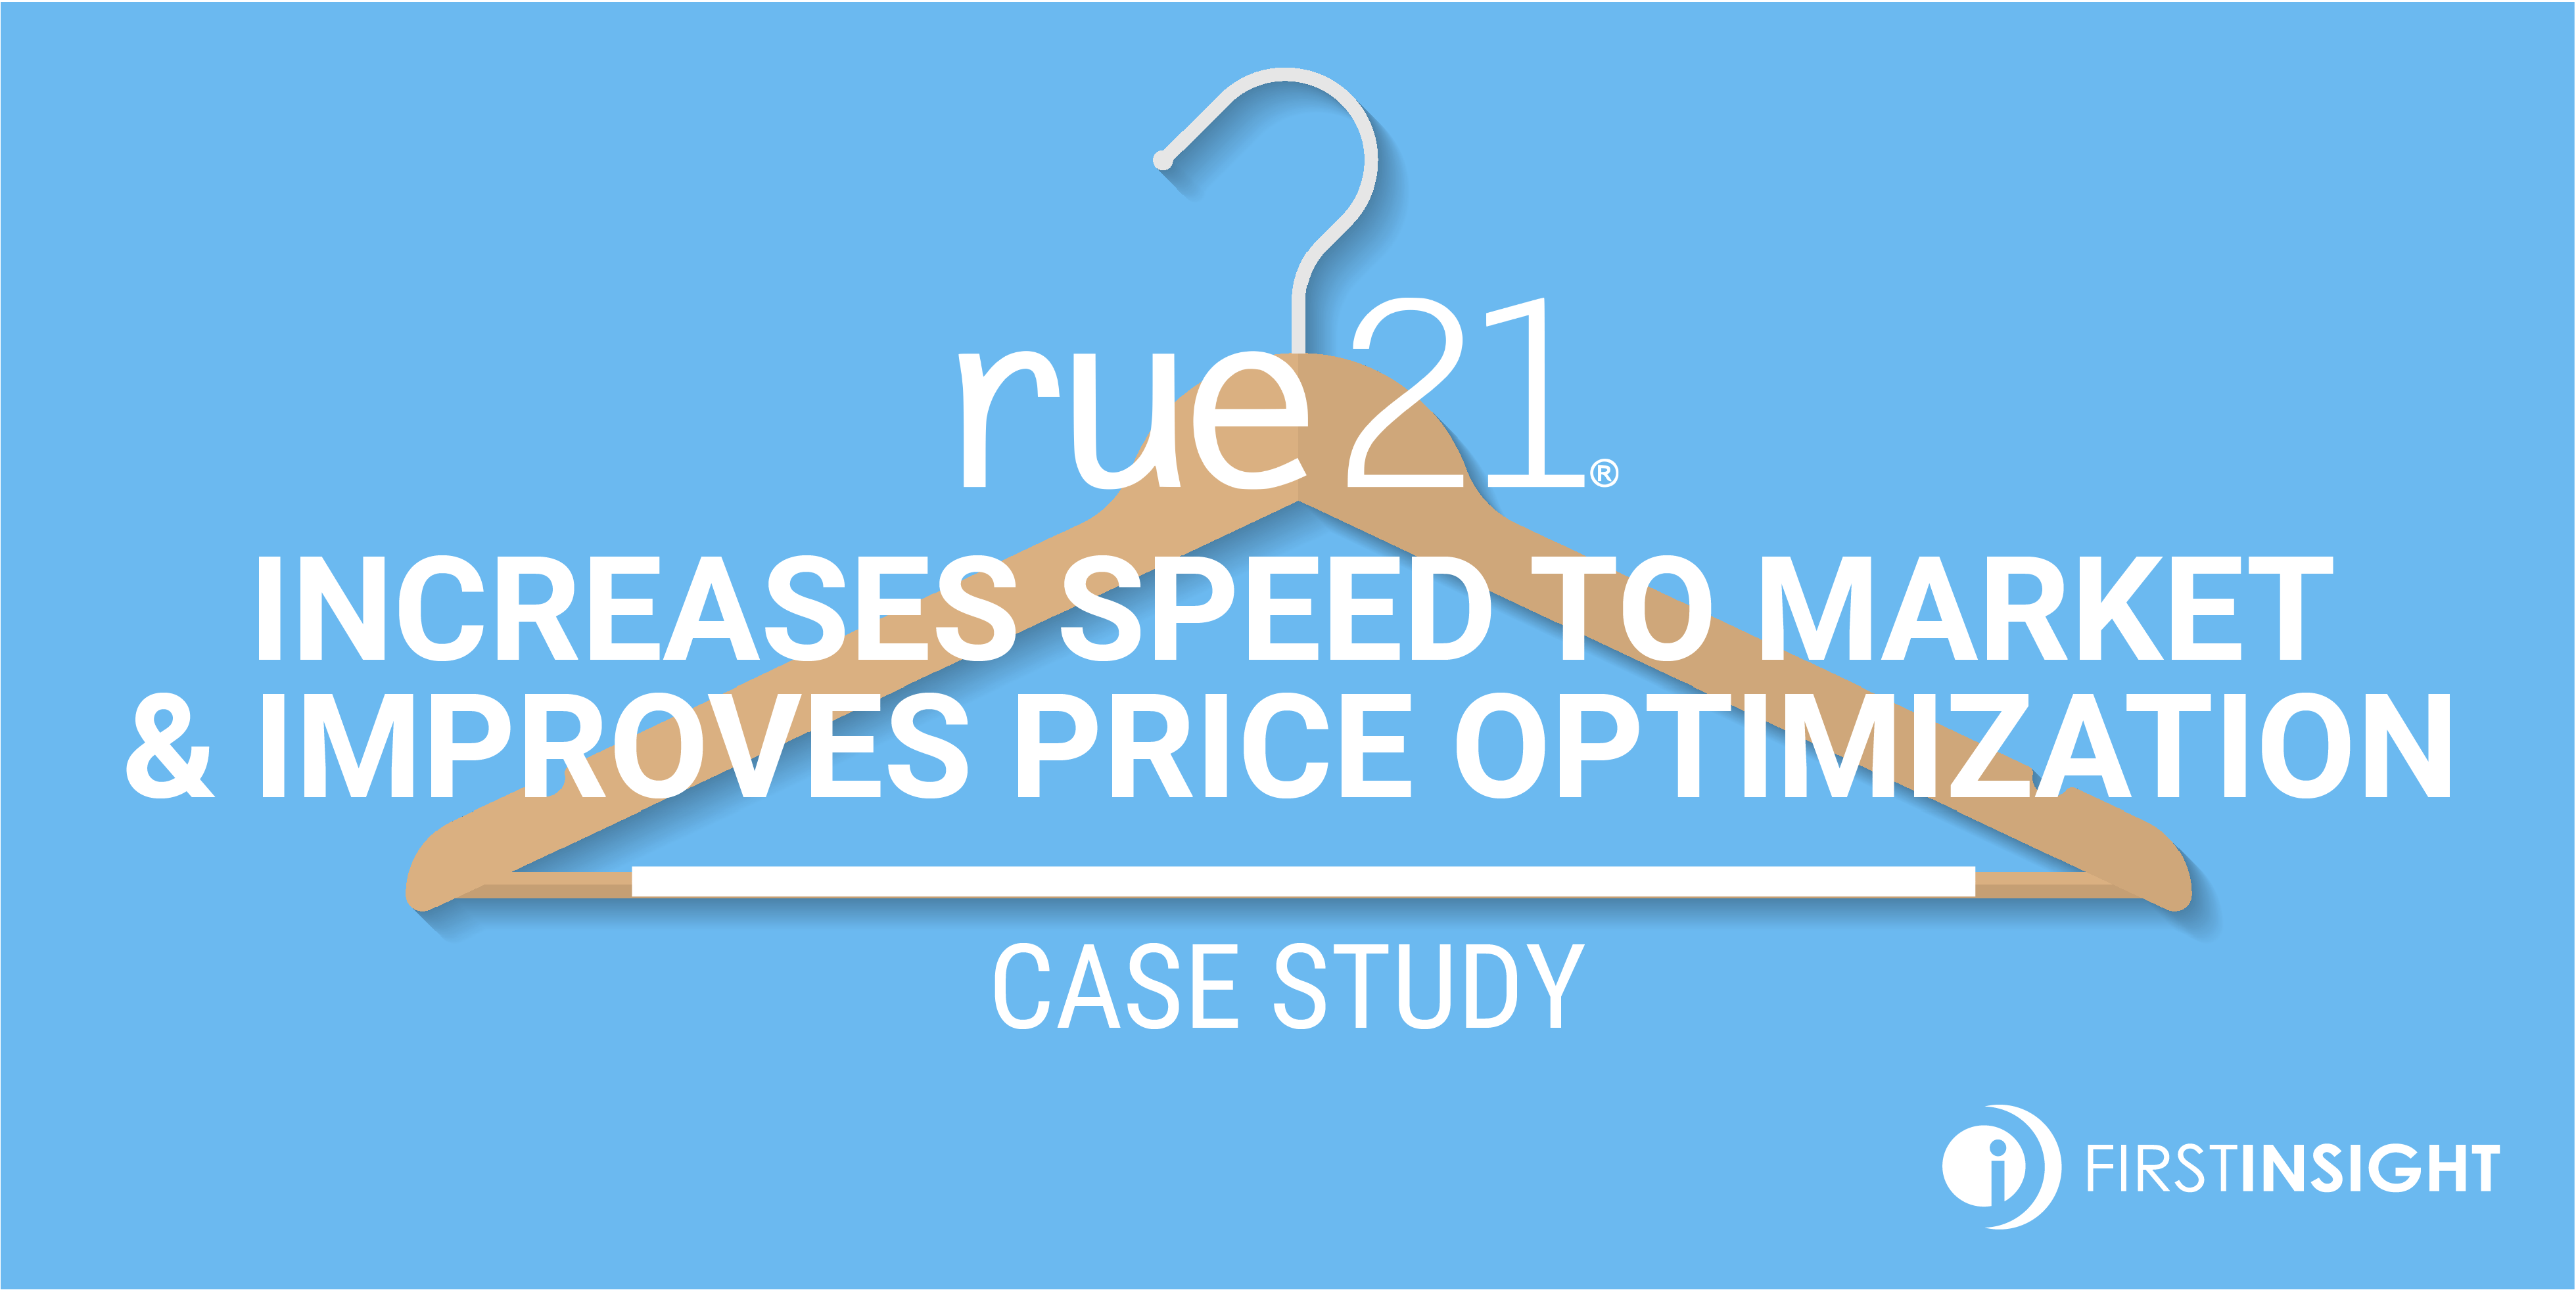 rue21 Increases Speed to Market & Improves Price Optimization